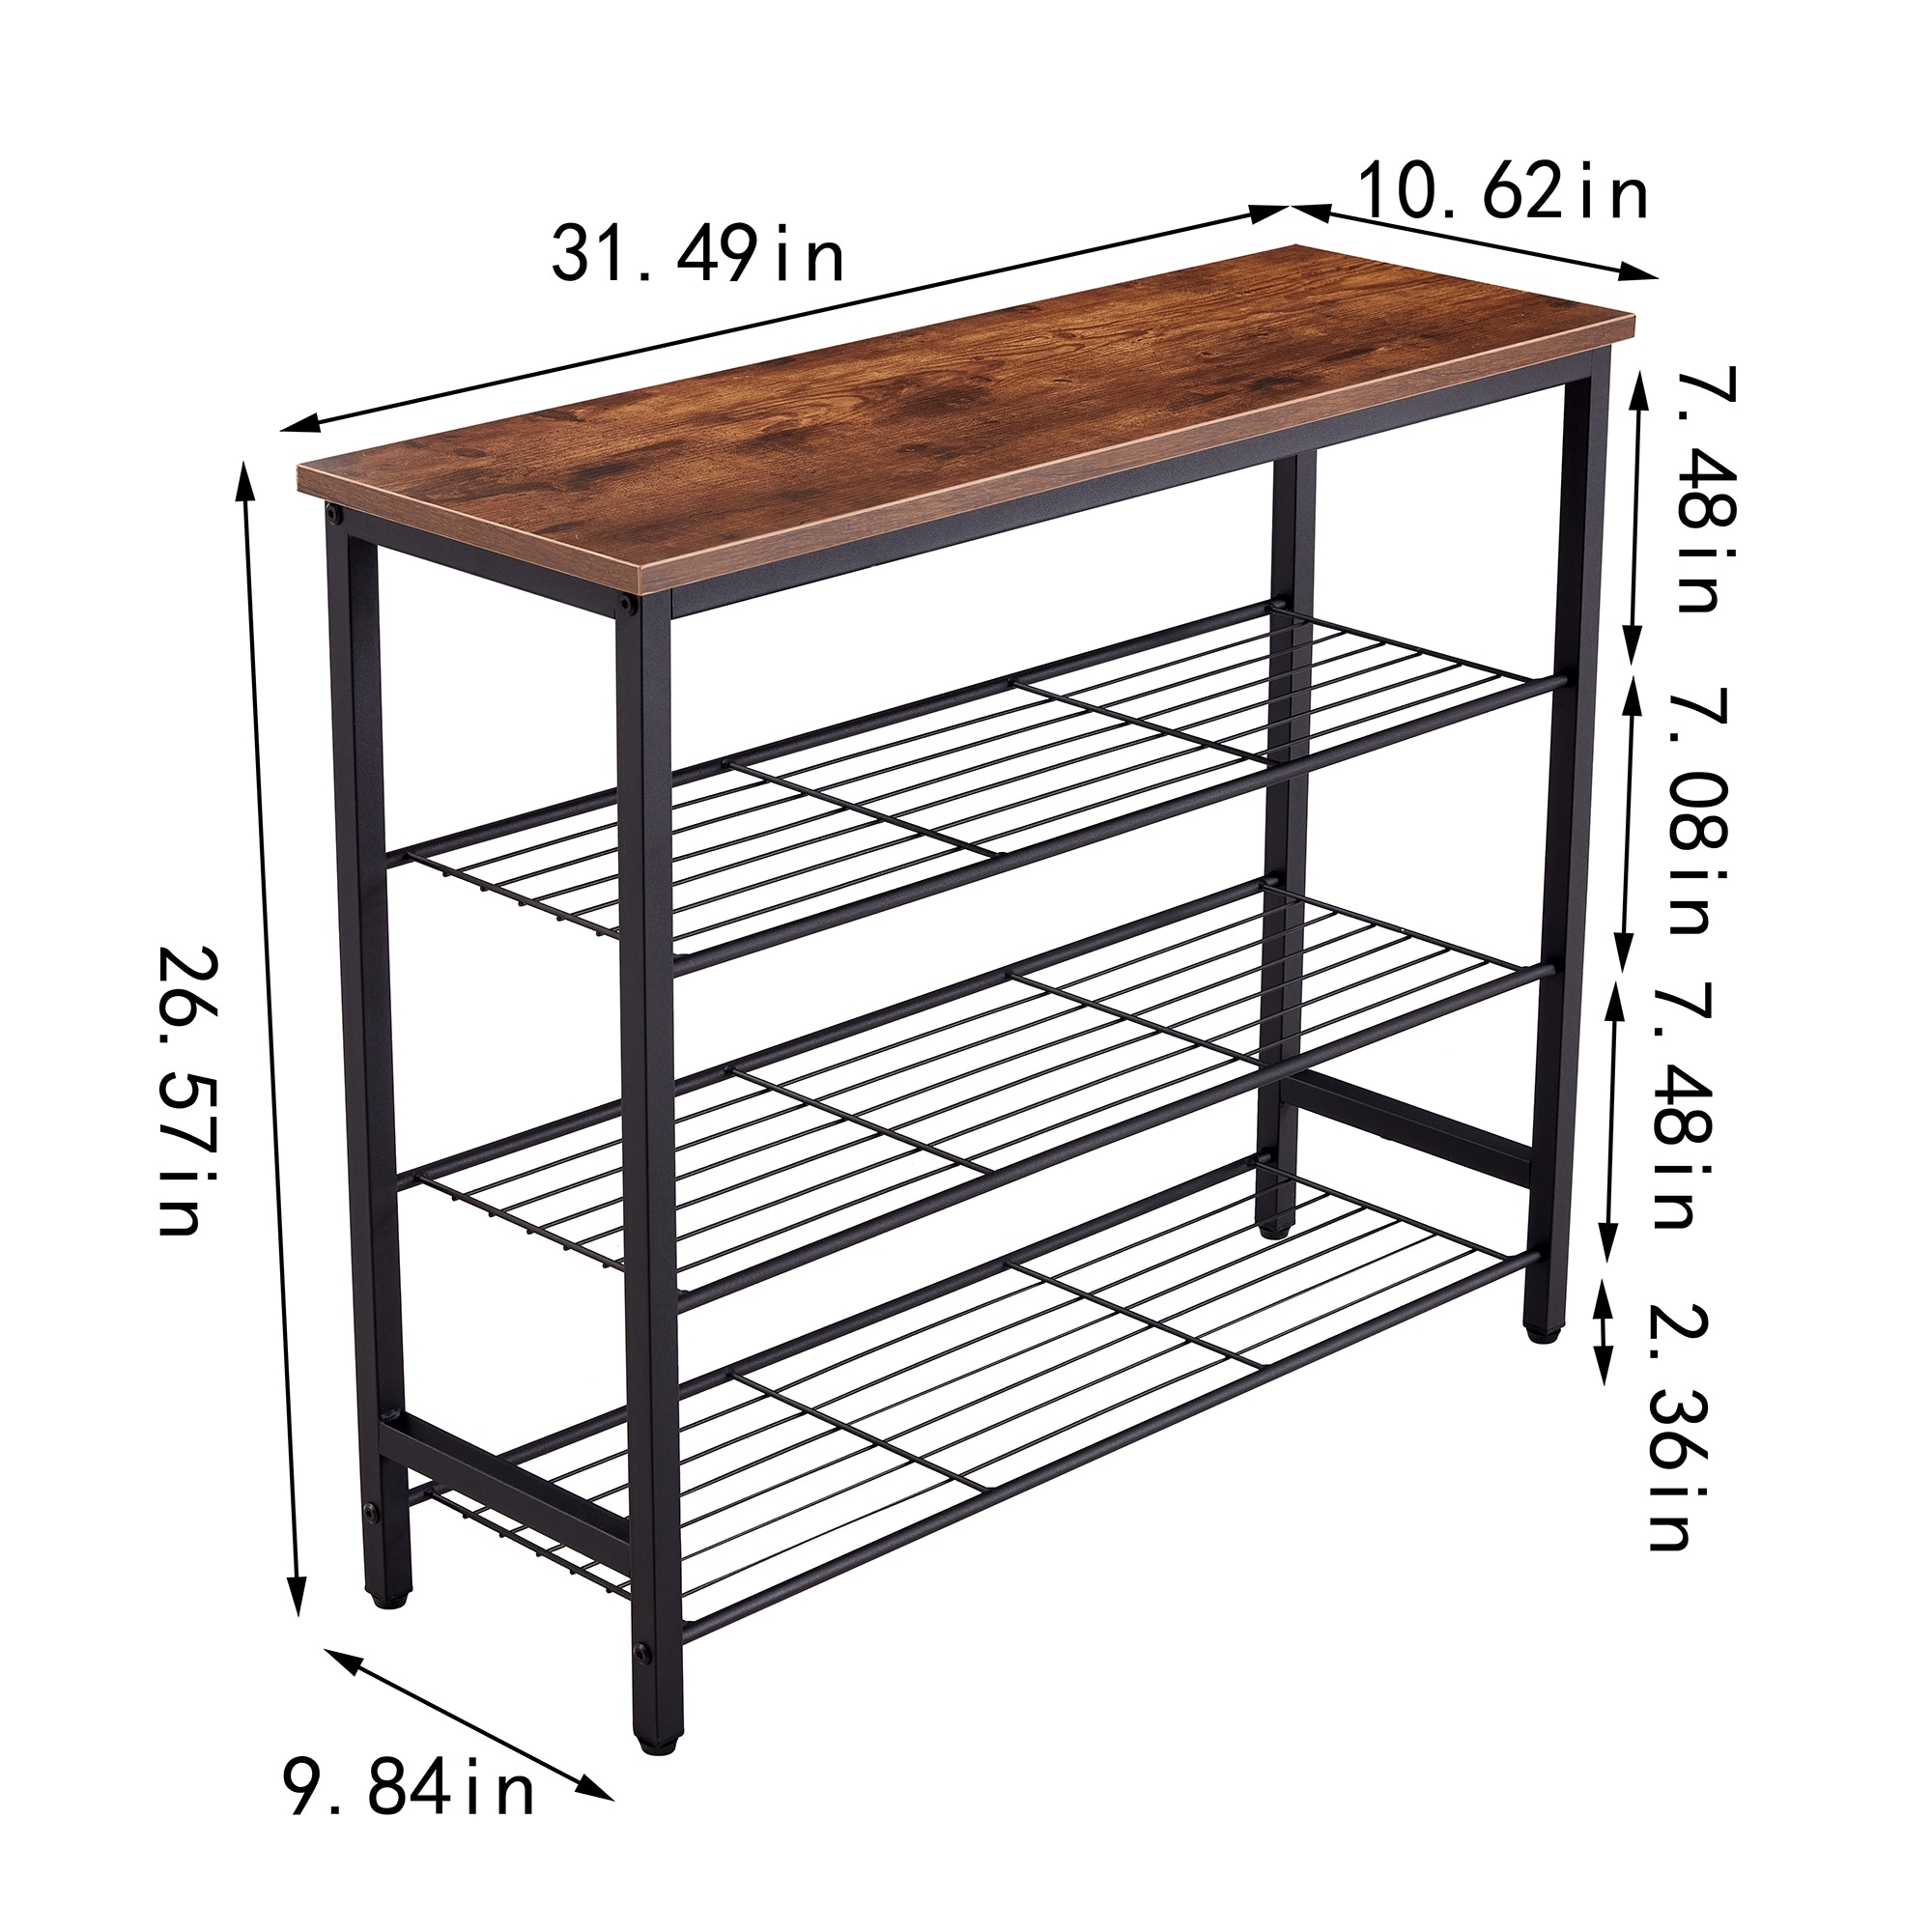 https://ak1.ostkcdn.com/images/products/is/images/direct/0461cf43639a760dcd4e2f7c4c83be1ba7df90dd/DN-4-Tier-Metal-Shoe-Rack%2C-Modern-Multifunctional-Shoe-Storage-Shelf-with-MDF-Top-Board%2C-1-pc-per-carton.jpg